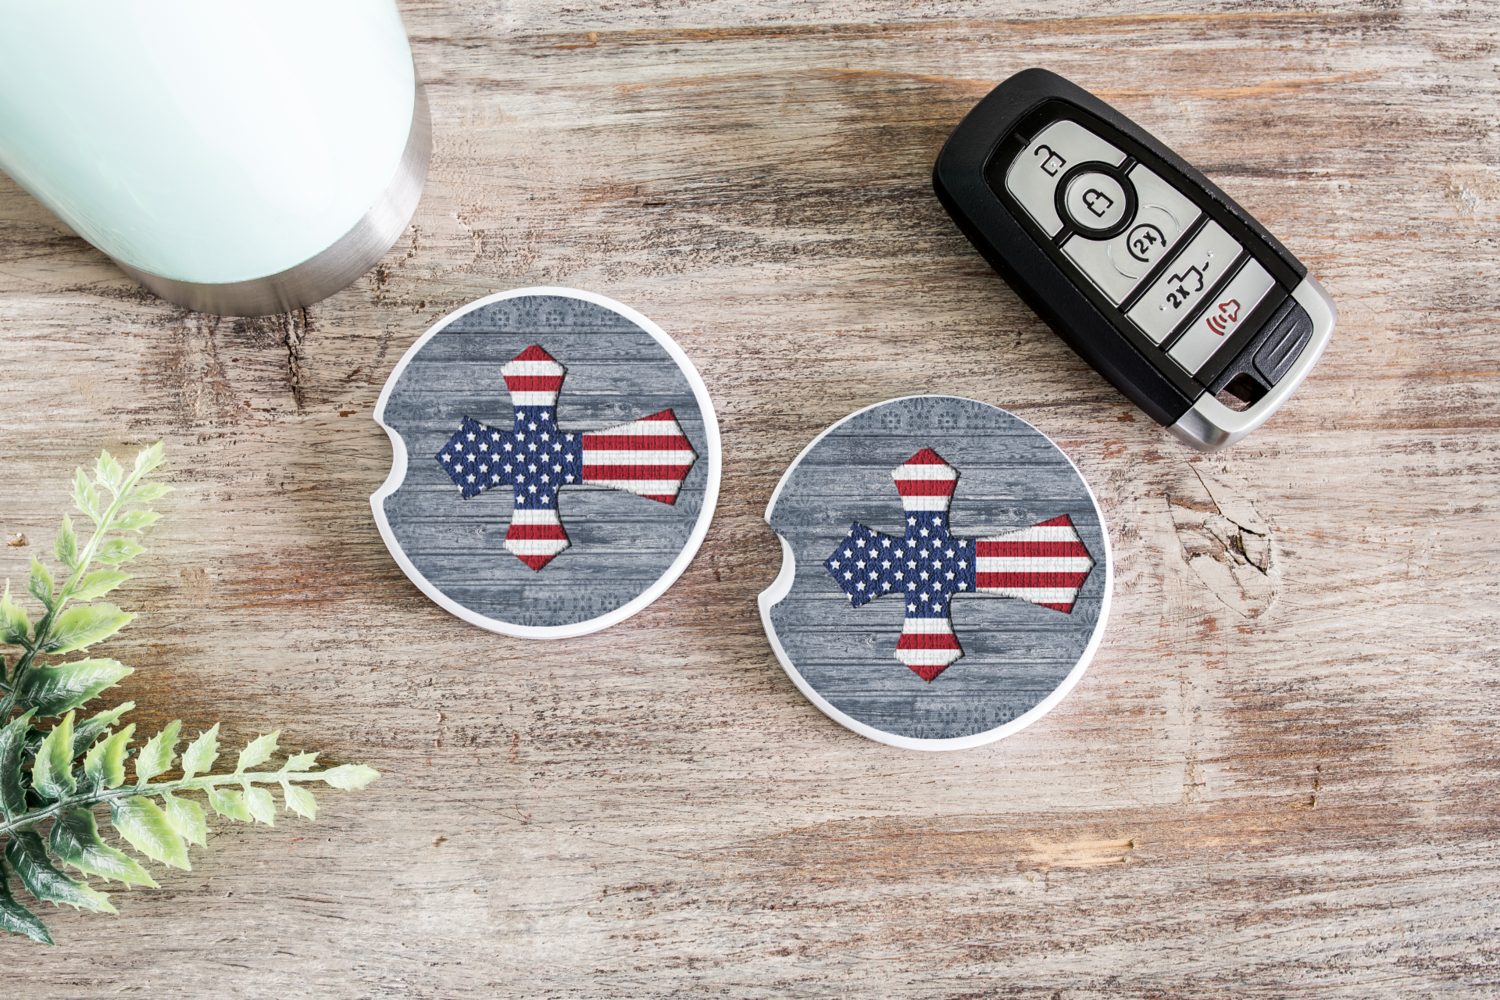 Car Coaster Handmade Gifts For Him or Her Couch or Car Coaster, Patriotic Car Coasters